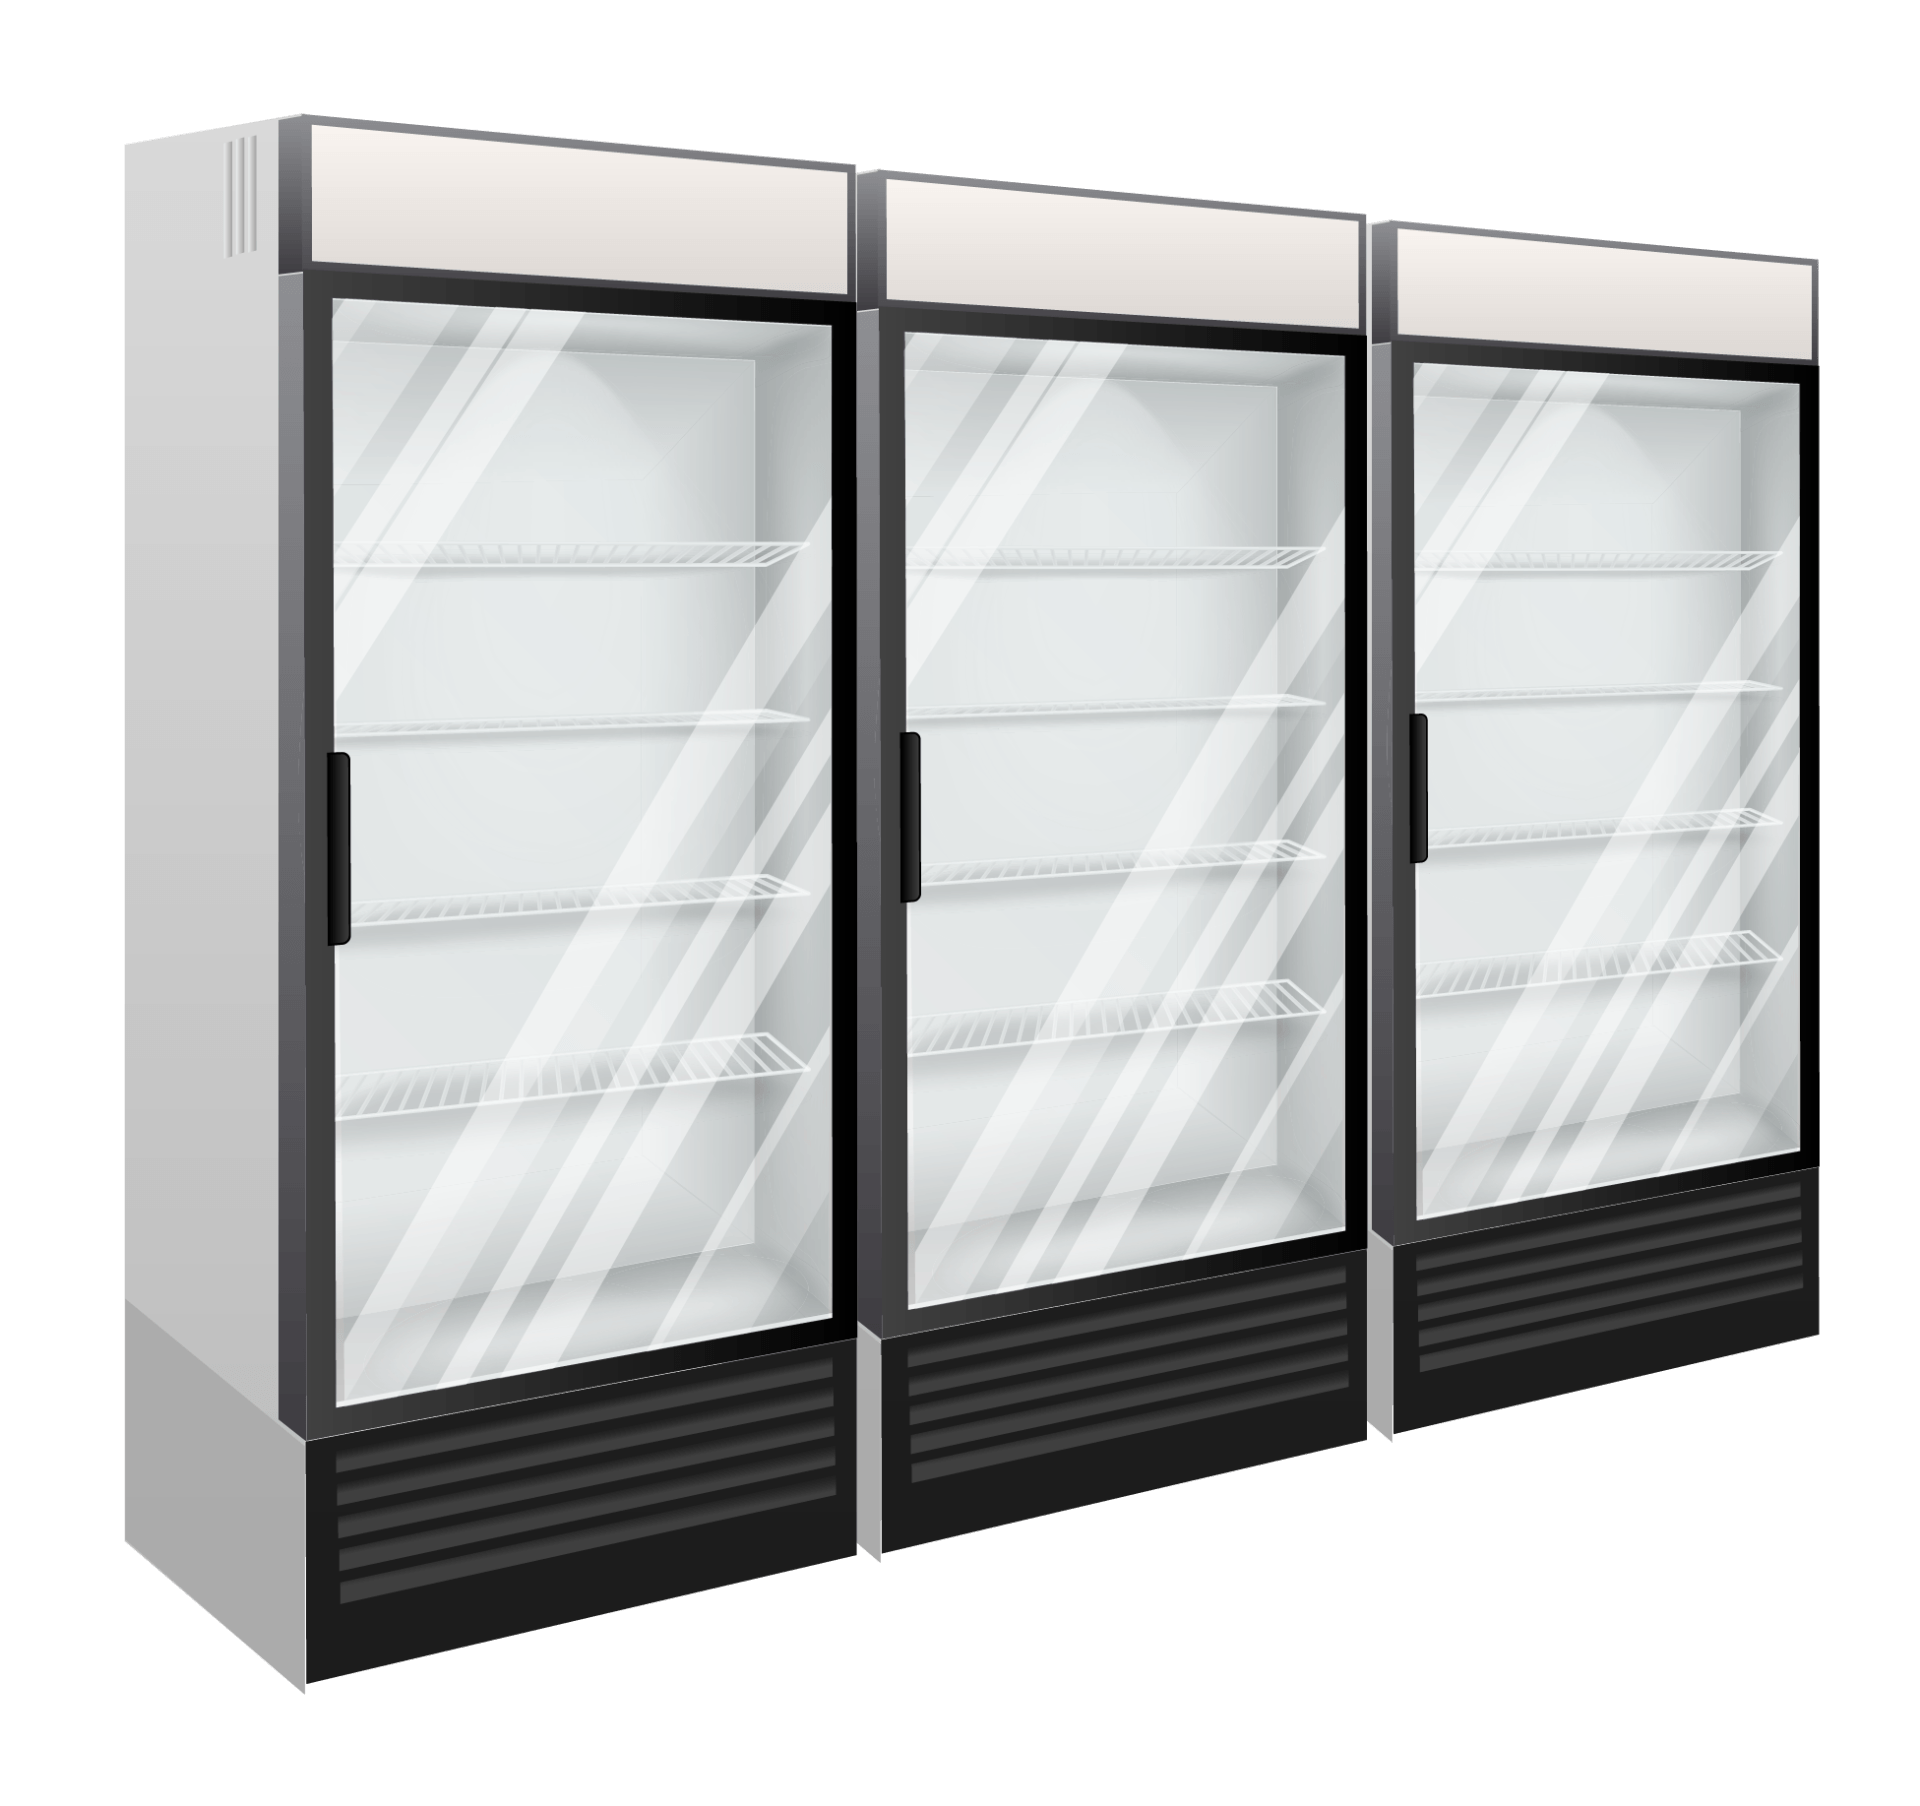 Three refrigerators with glass doors are lined up next to each other on a white background.